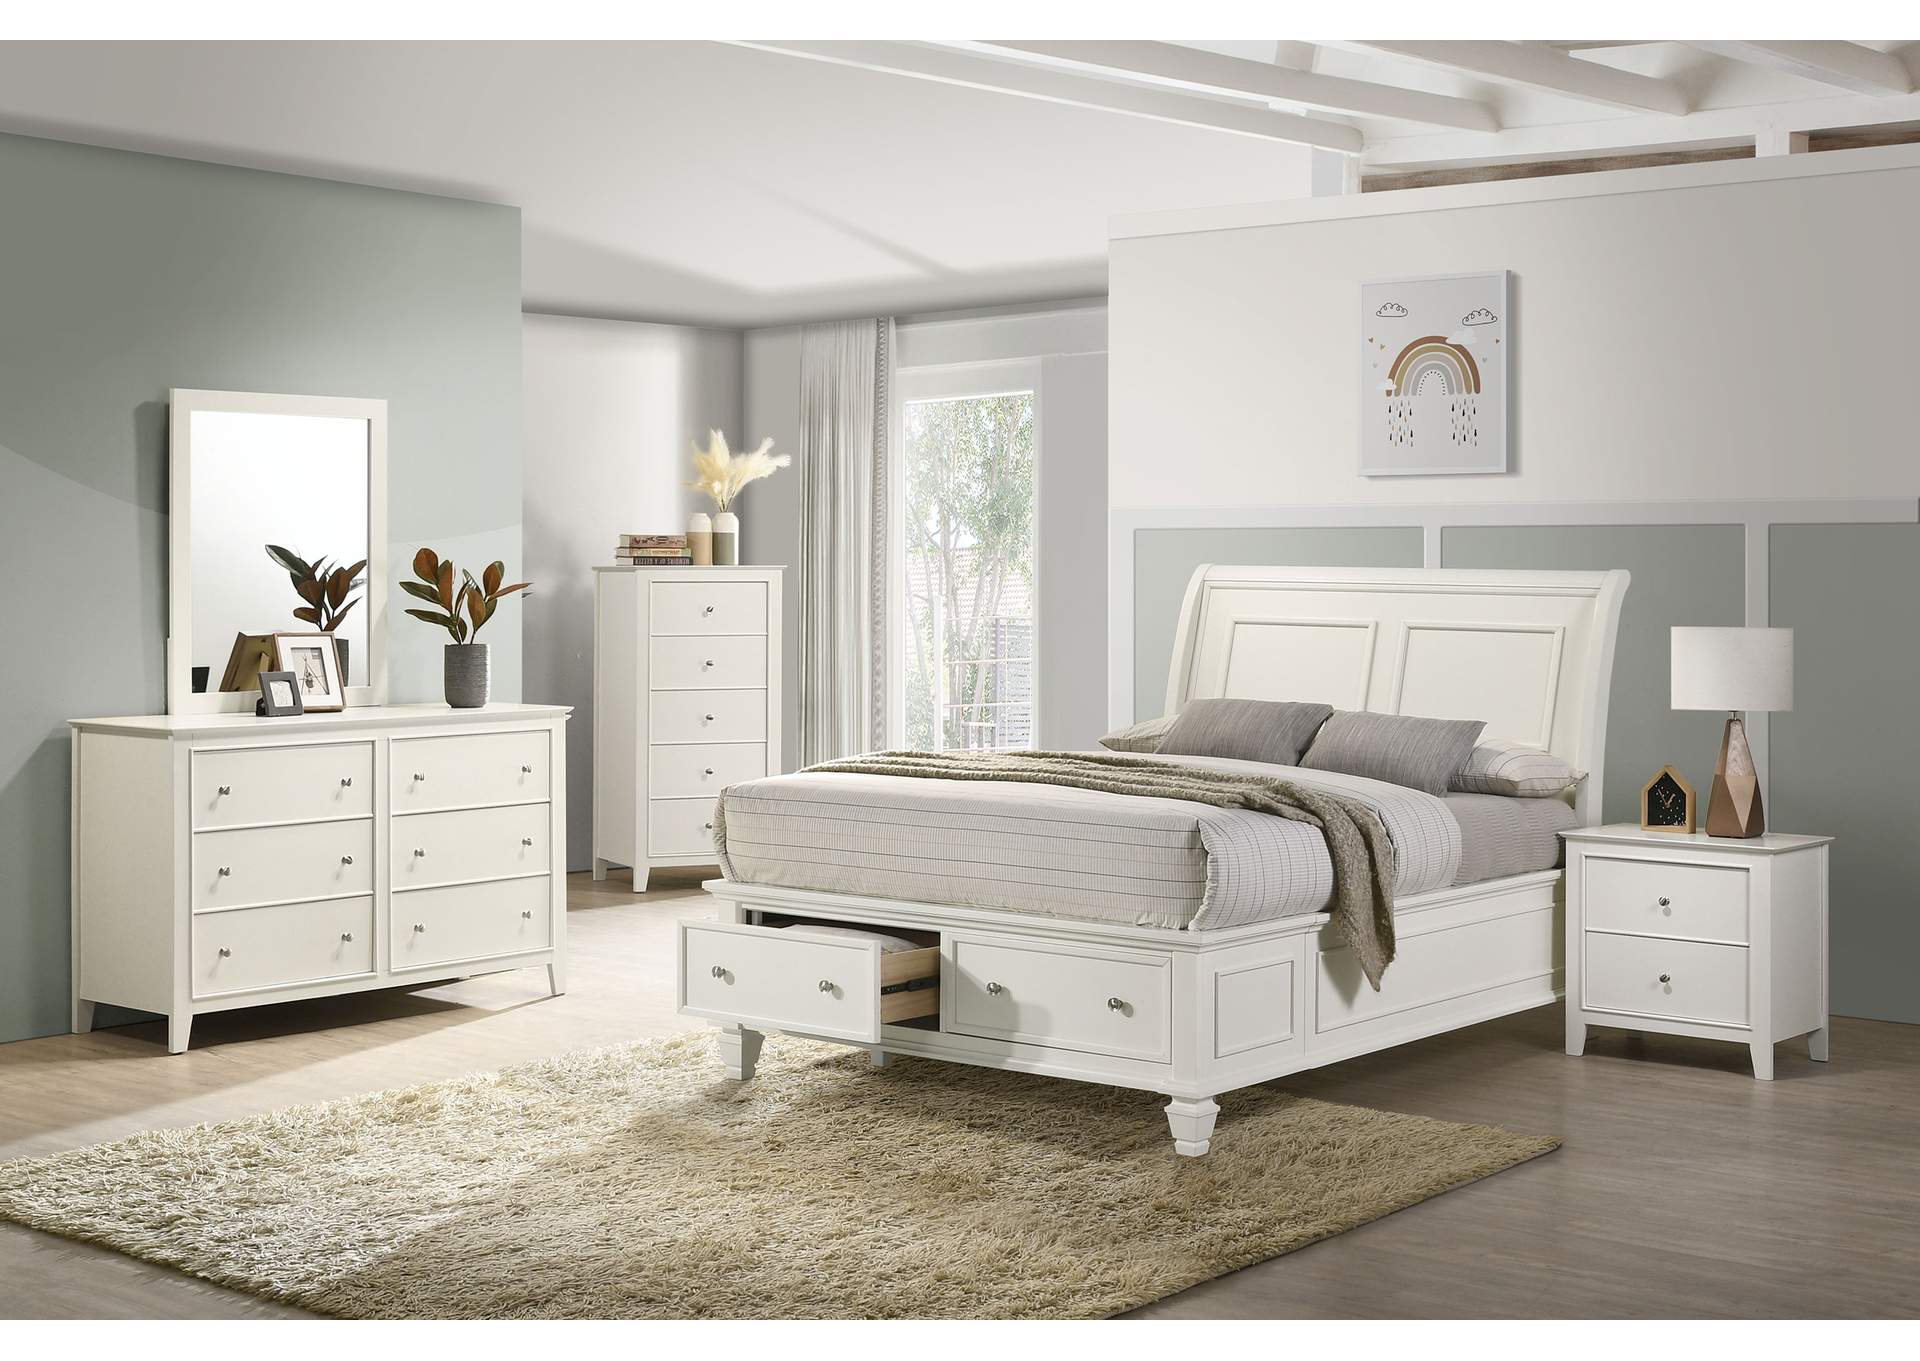 Selena Full Sleigh Bed with Footboard Storage Buttermilk,Coaster Furniture